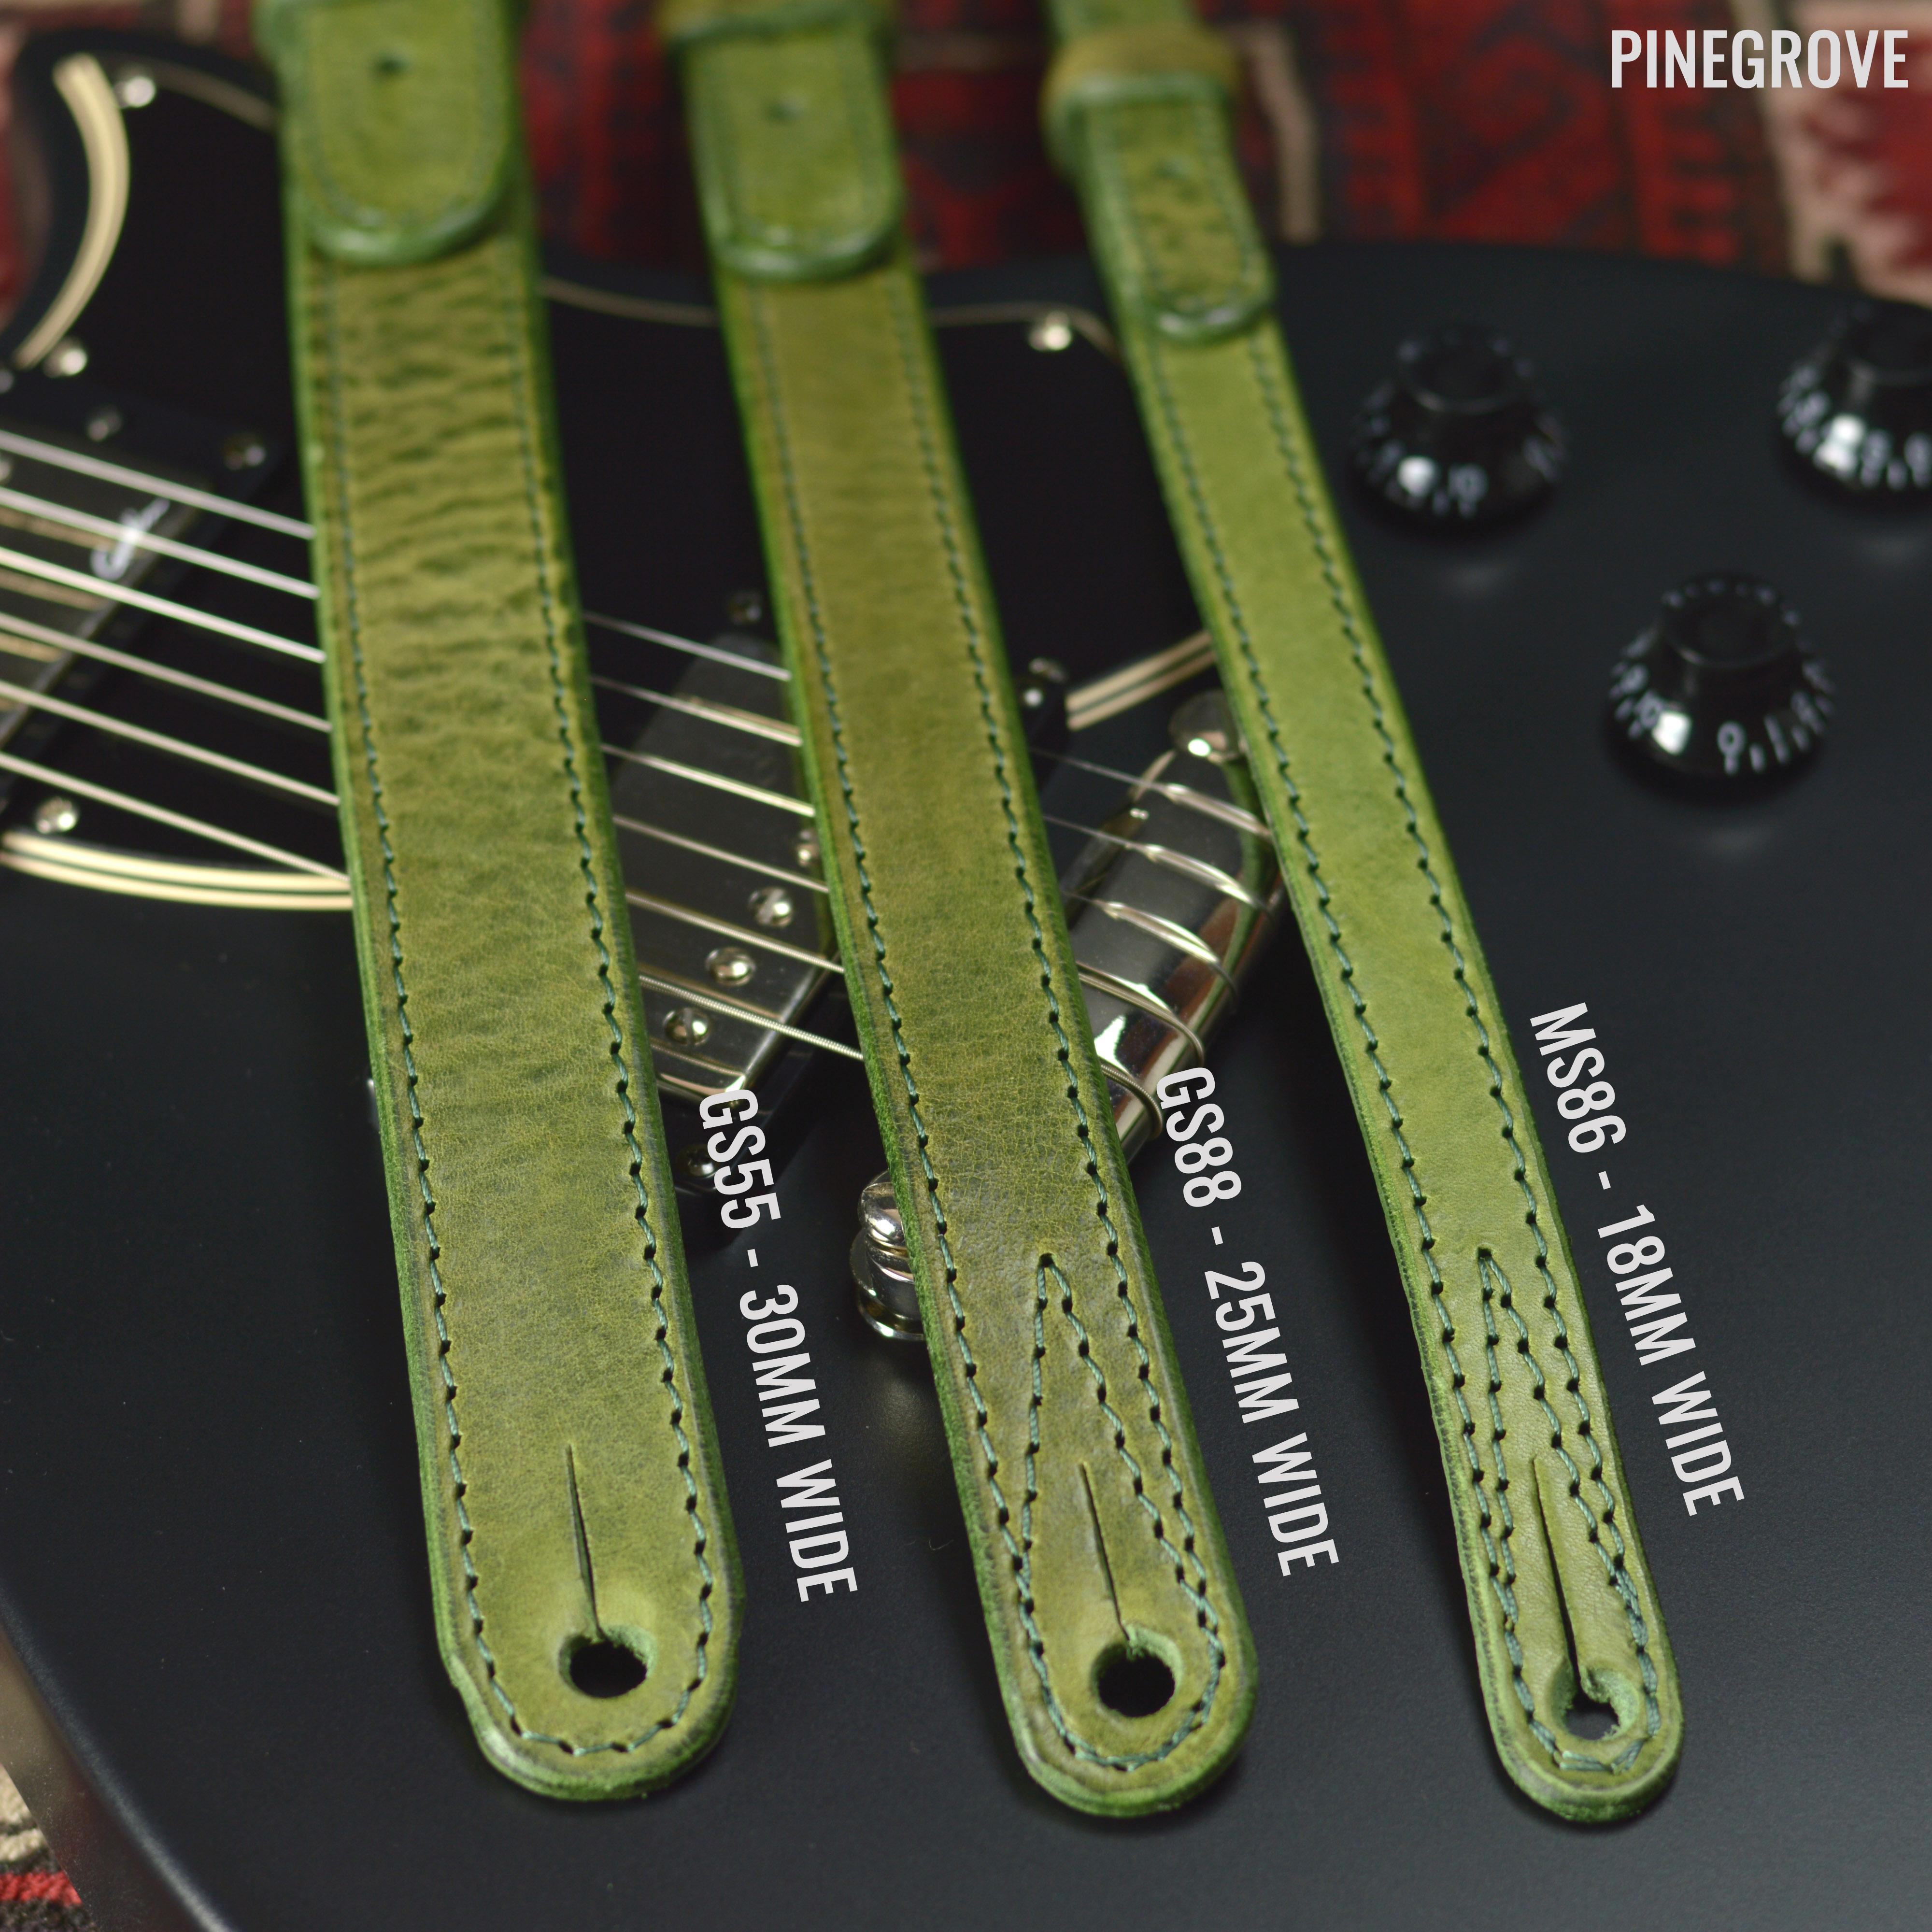 Pinegrove Leather mandolin straps in green